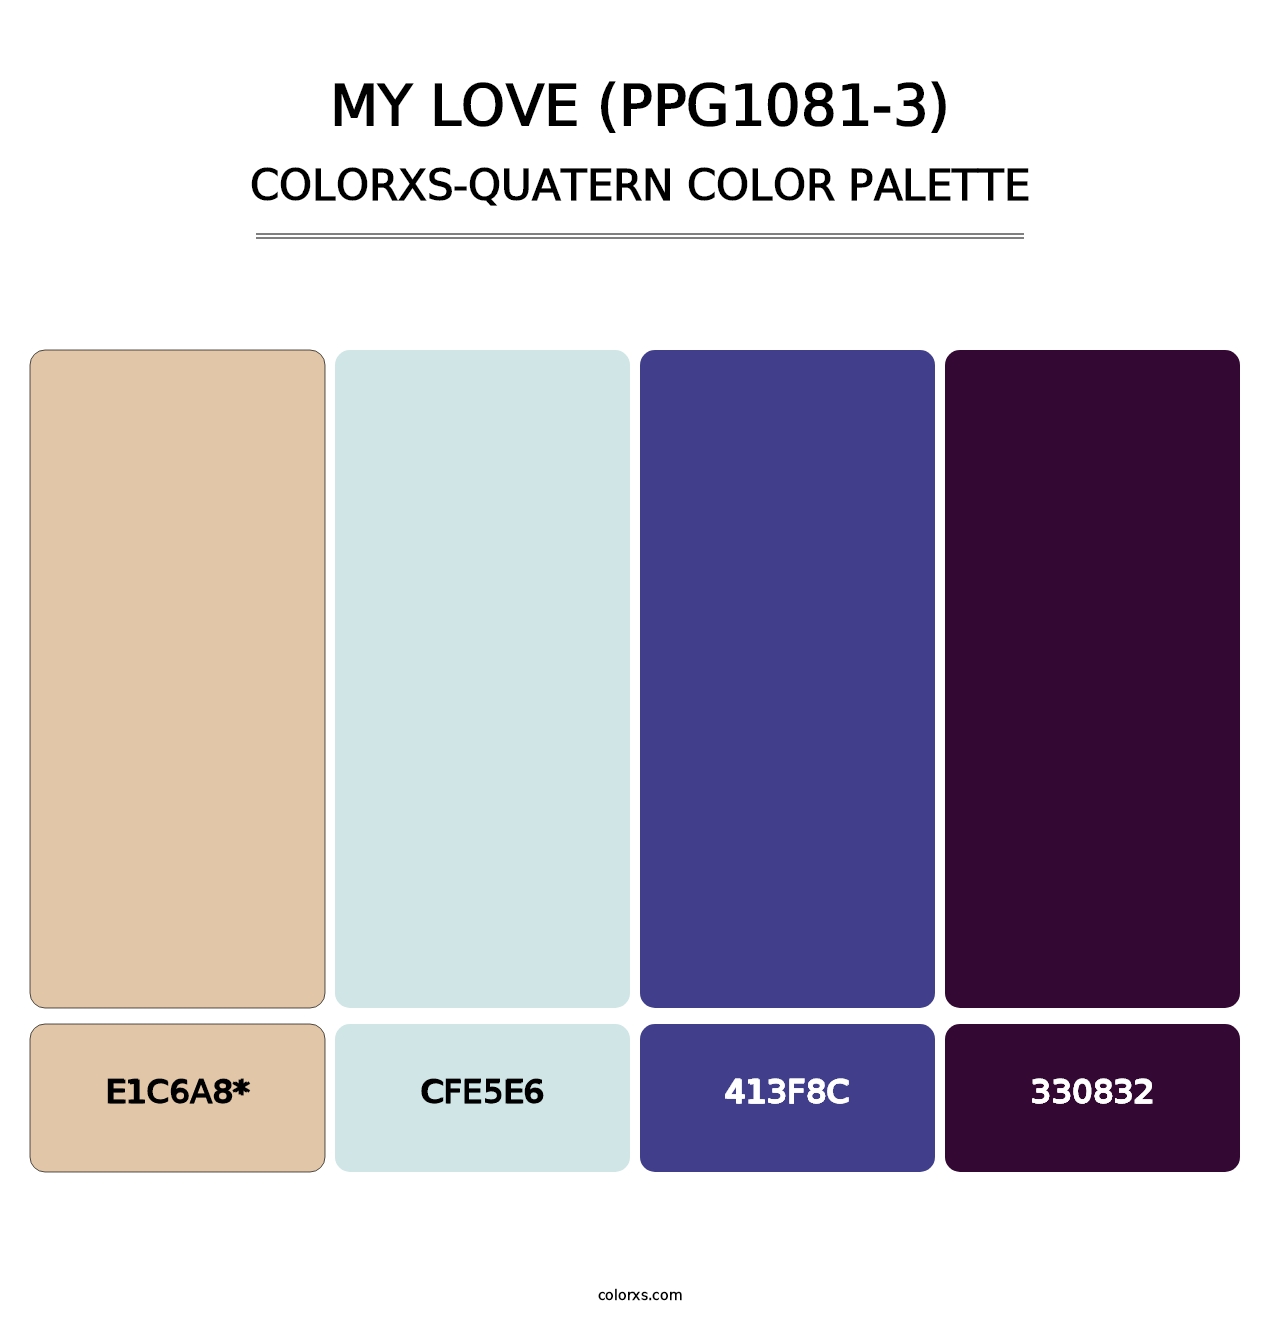 My Love (PPG1081-3) - Colorxs Quatern Palette